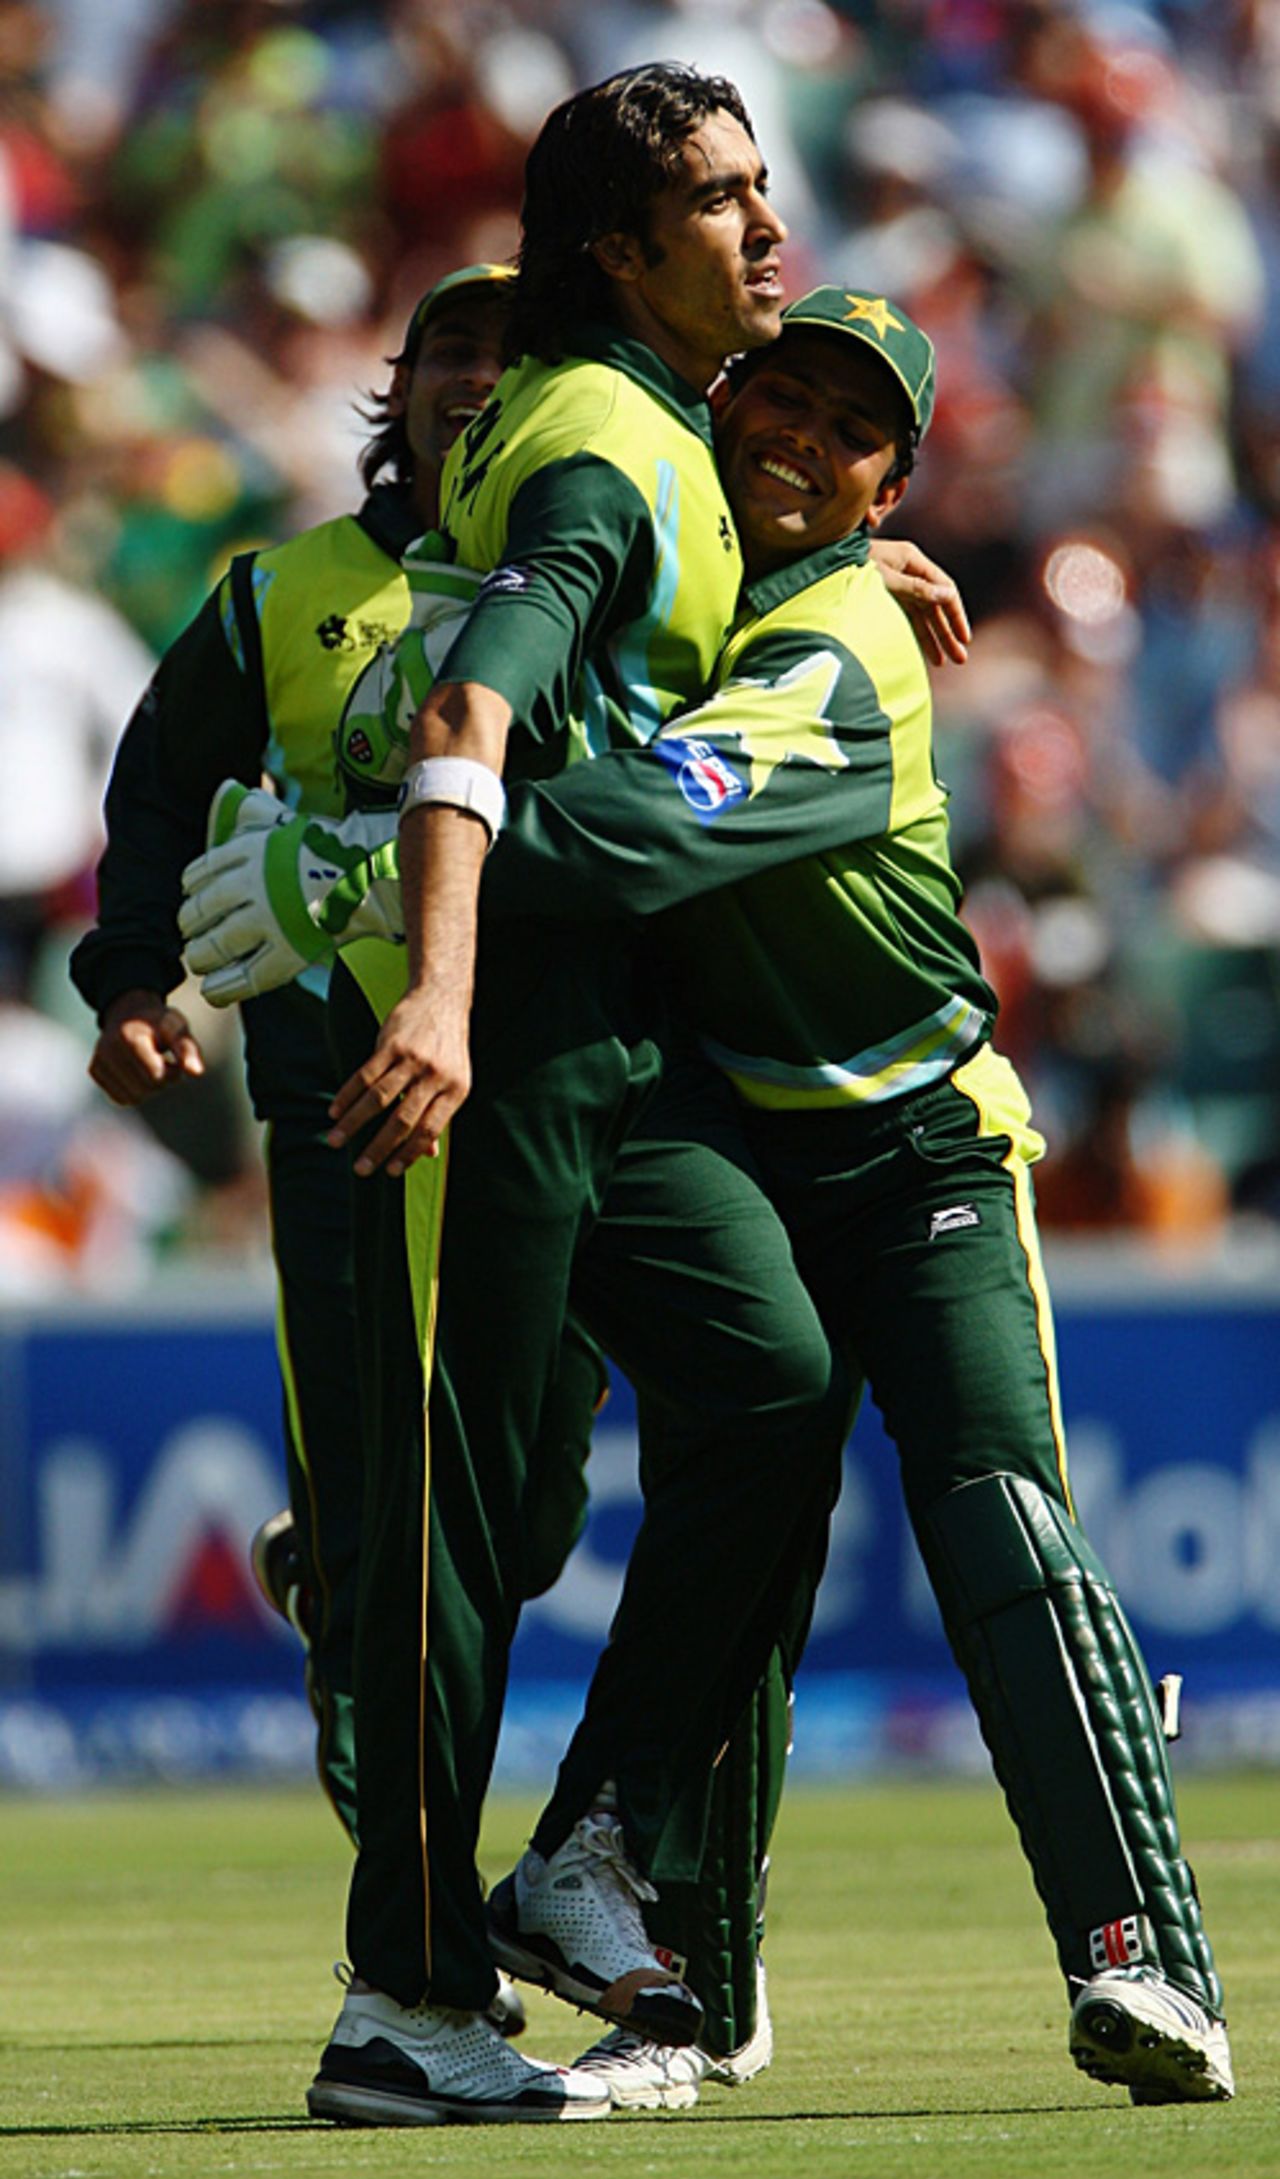 Umar Gul is mobbed by his team-mates on one of his three wickets in the World Twenty20 final, India v Pakistan, ICC World Twenty20 final, Johannesburg, September 24, 2007